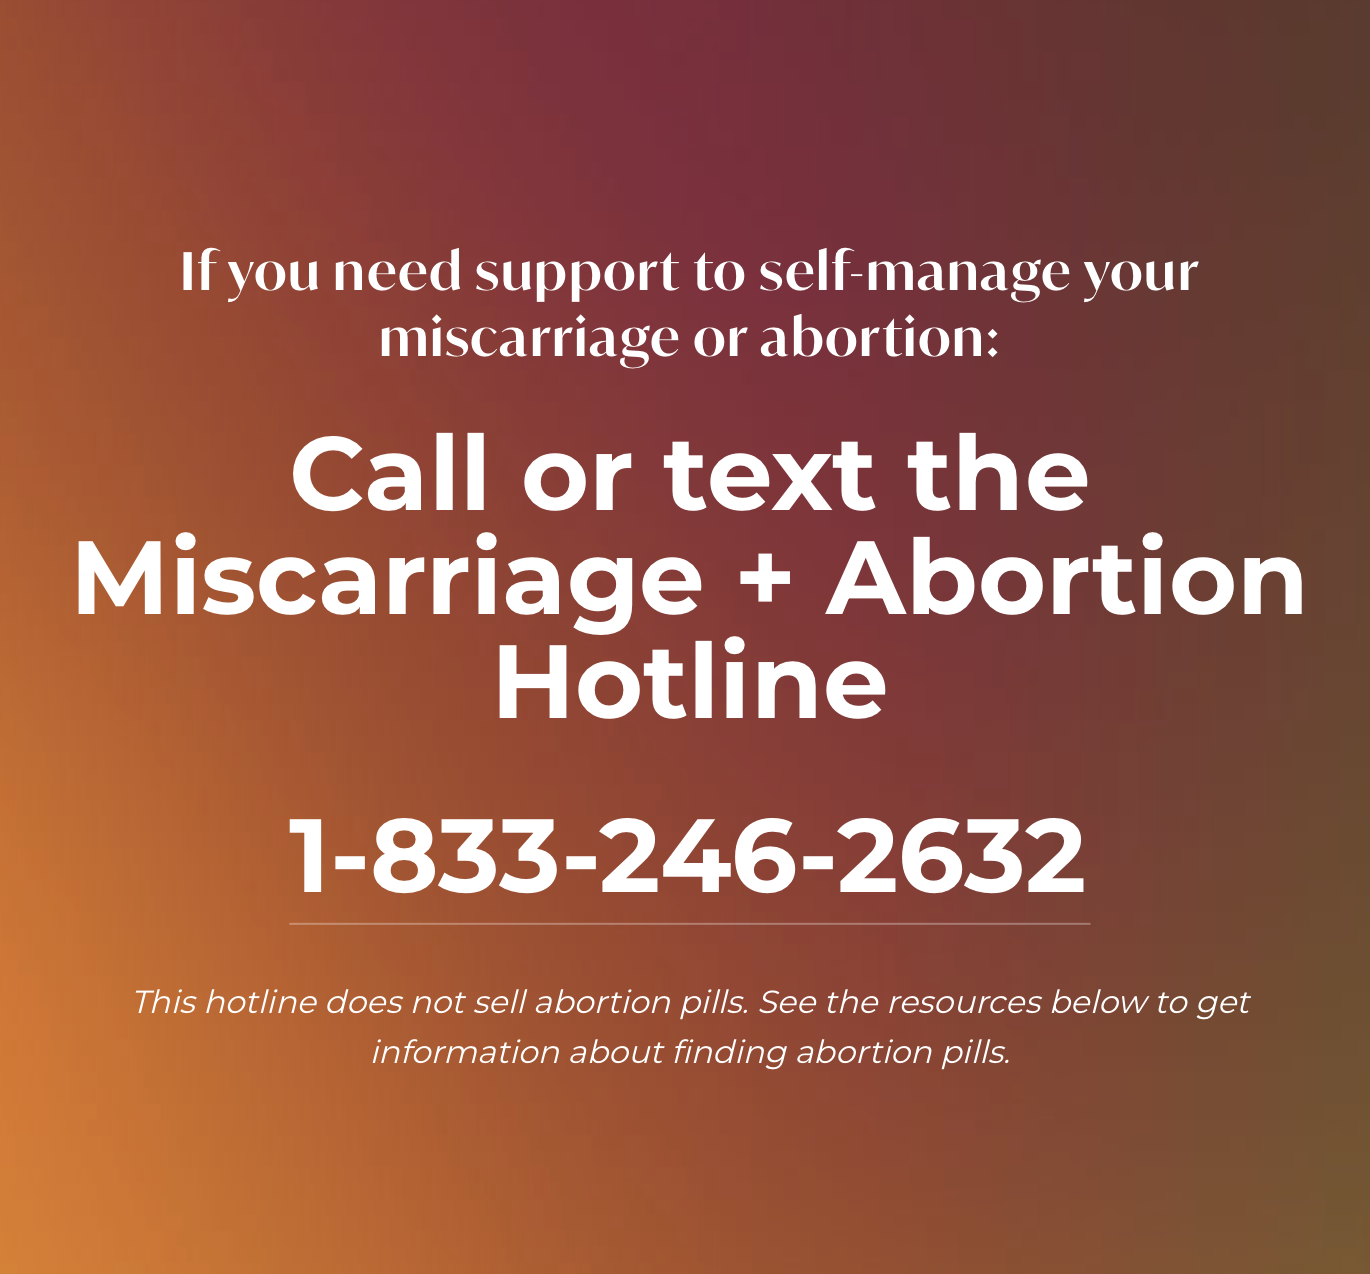 Miscarriage & Abortion Hotline (@ma_hotline) • Instagram photos and videos